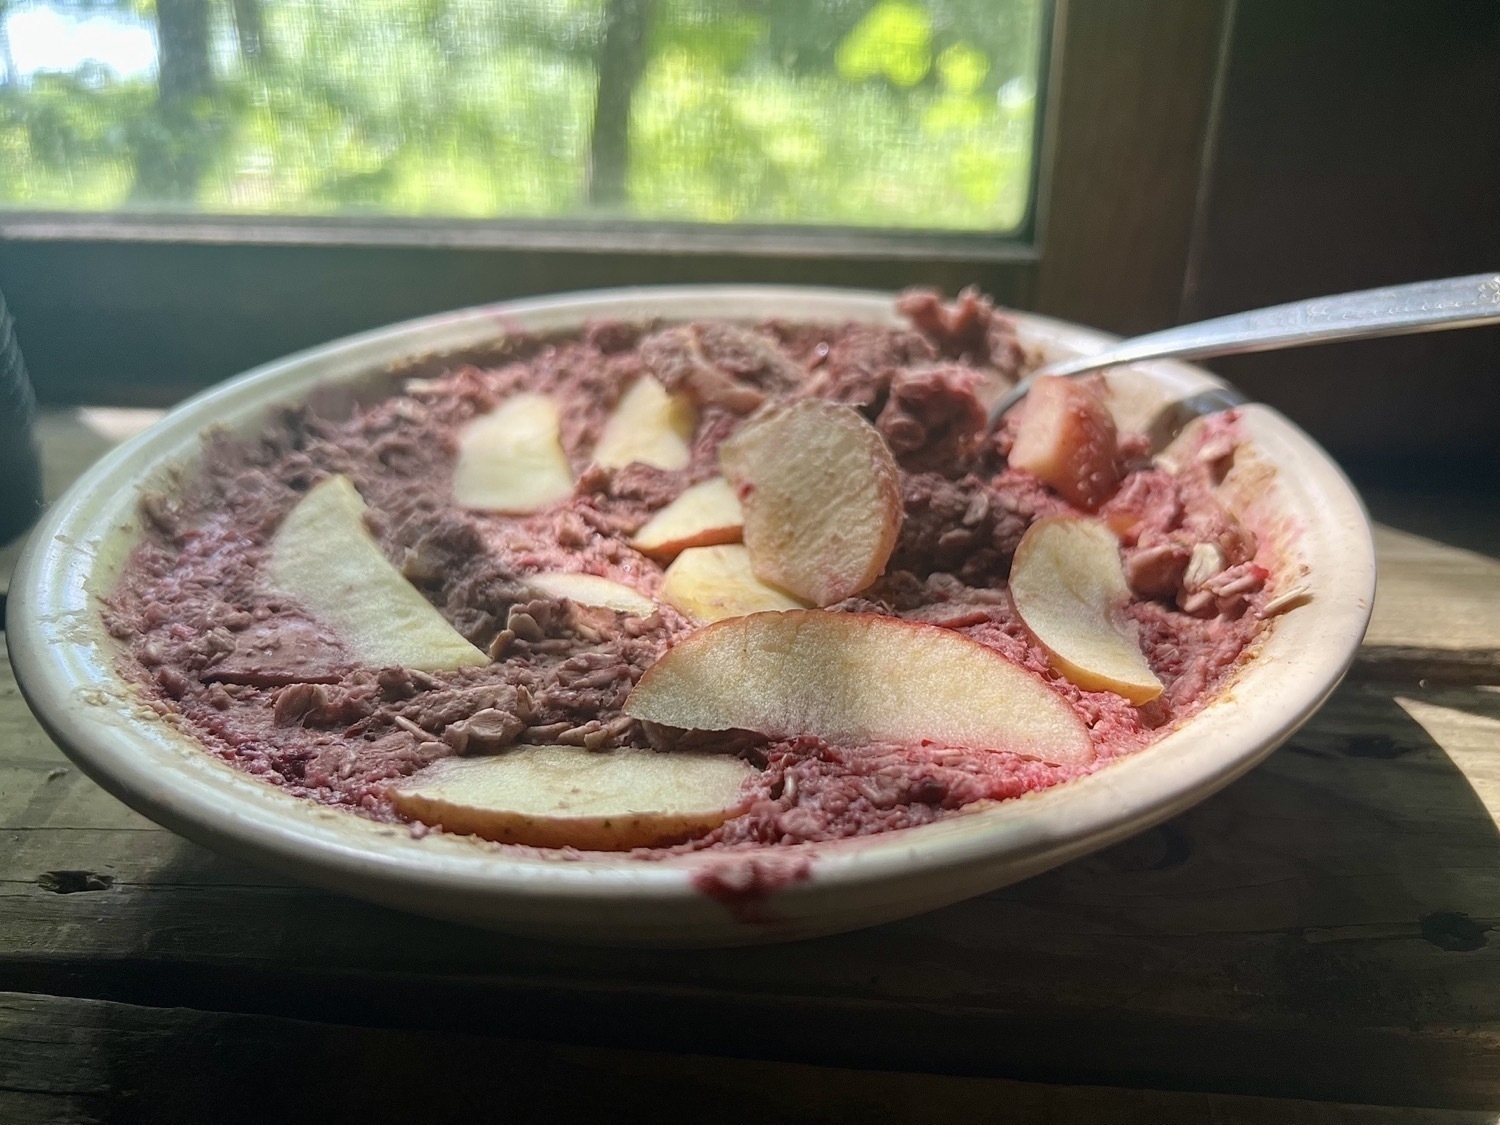 A yellow bowl containing baked oatmeal in front of a window. The oatmeal is mixed with blended blackberries so it's purplish pink with apple wedges across the top